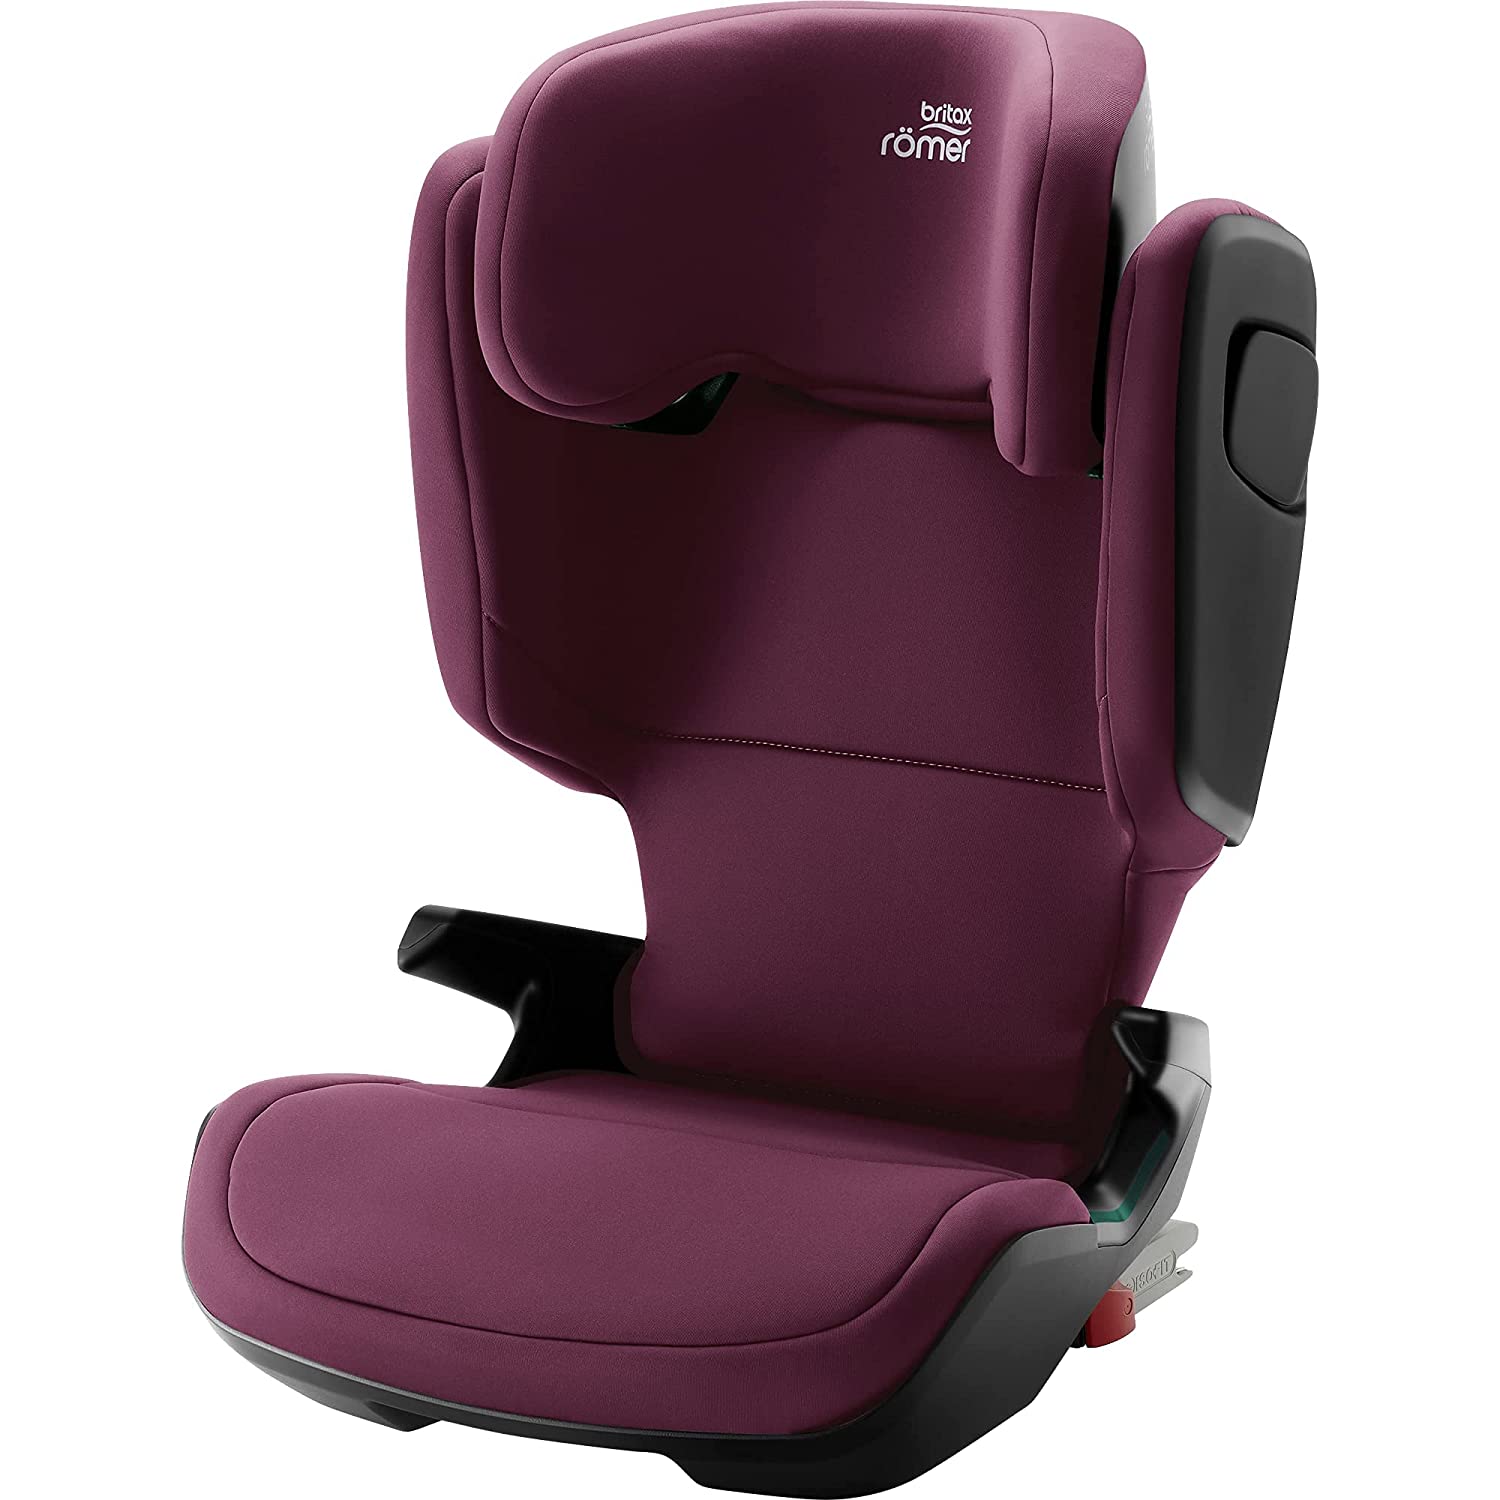 Britax Romer Britax Römer Kidfix M i-Size Child Car Seat with Isofix and Ventilation, 100 - 150 cm (i-SIZE), 3.5 to 12 Years, Burgundy Red